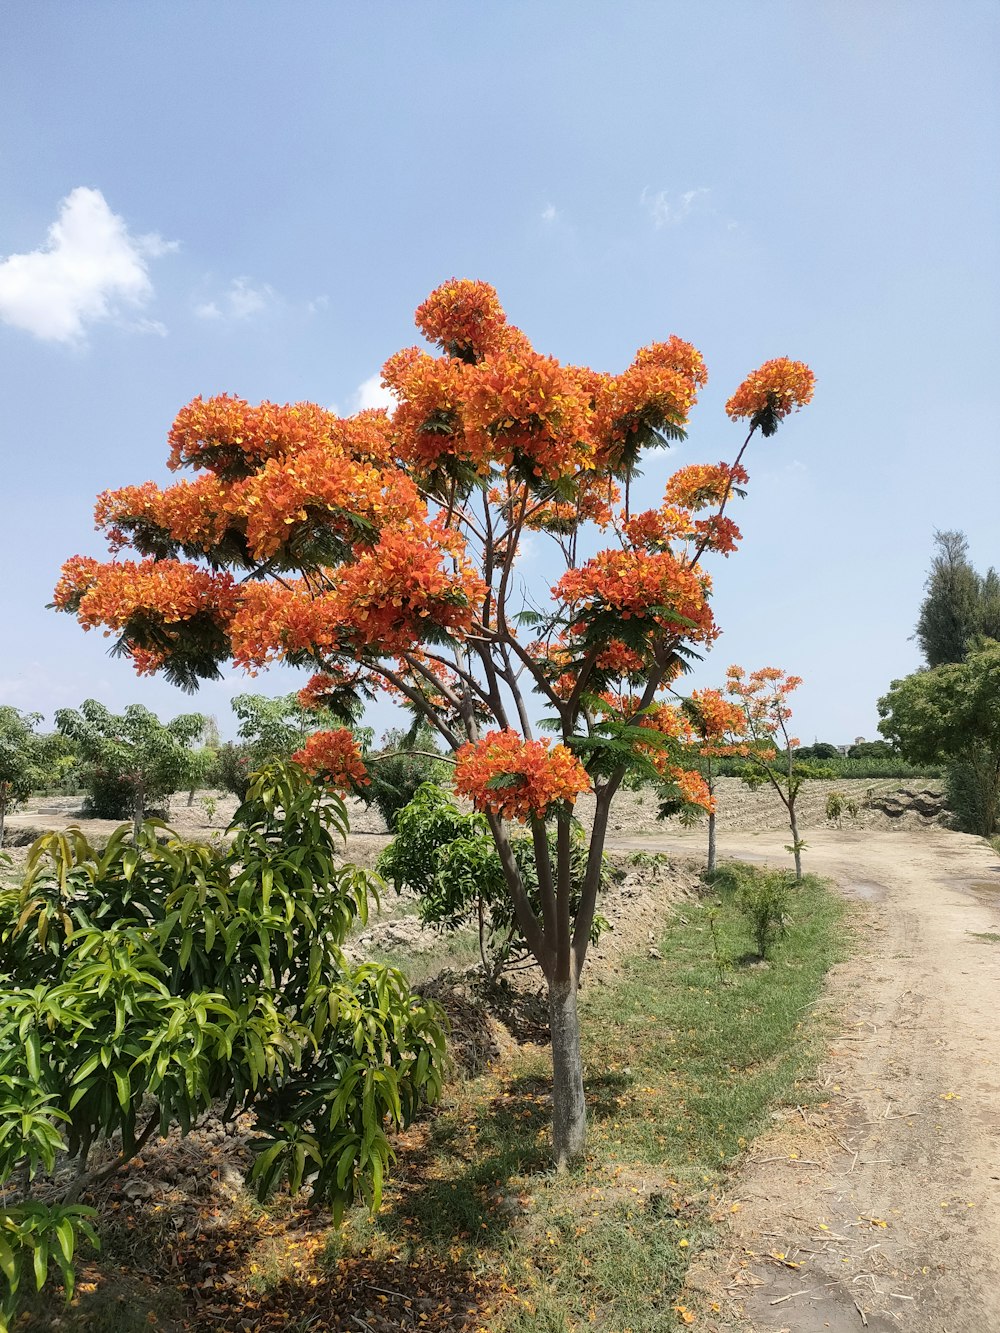 a tree with bright orange flowers on a dirt road